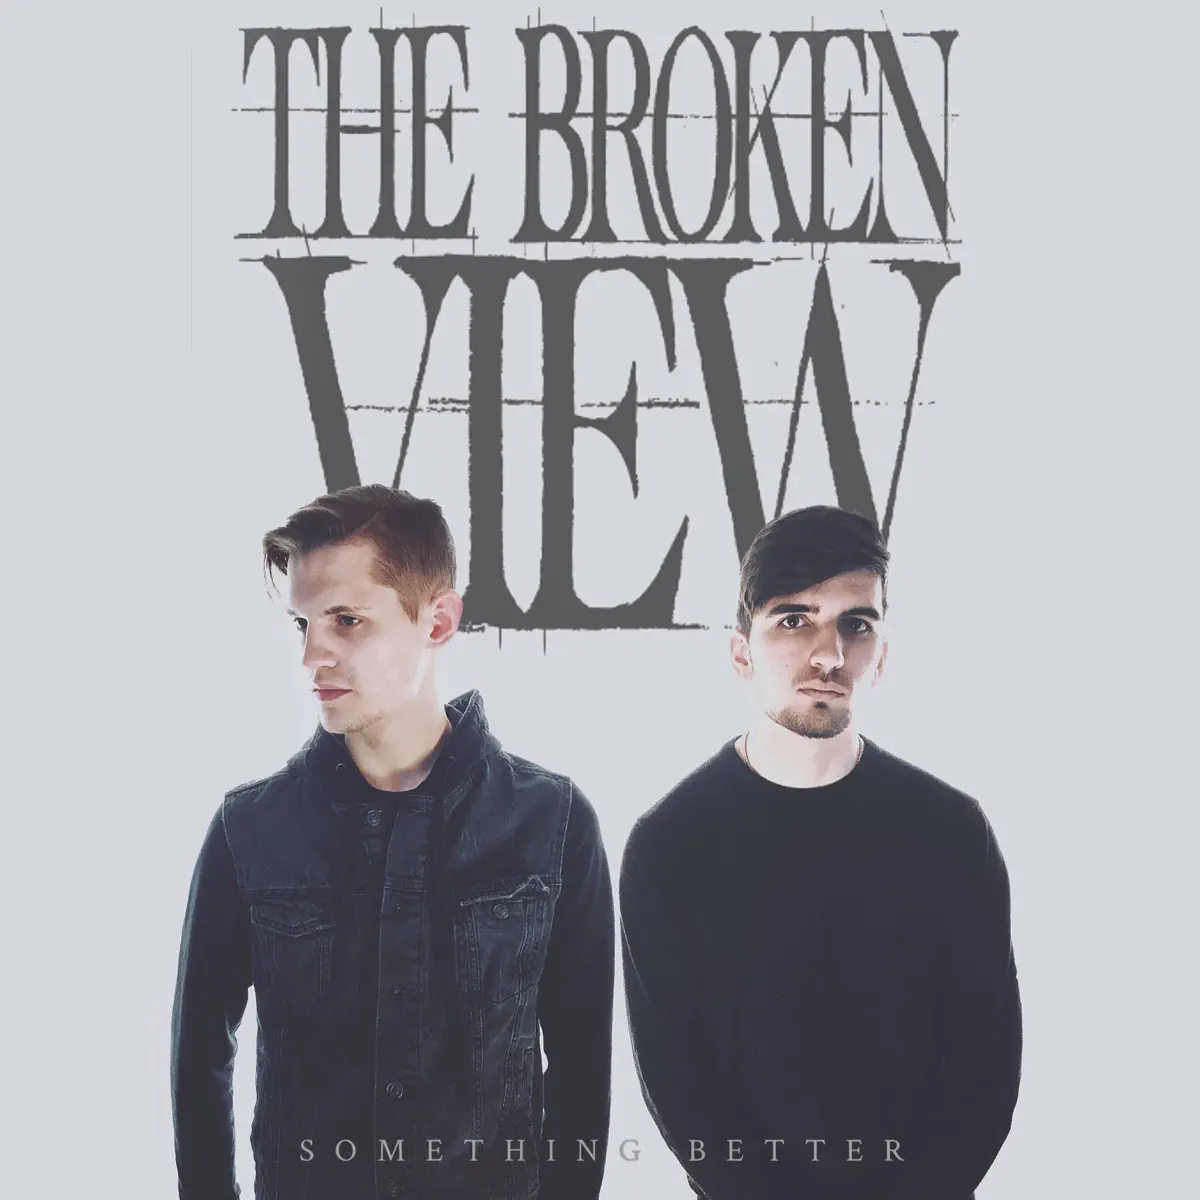 The Broken View - Something Better - EP (2019) [iTunes Plus AAC M4A]-新房子